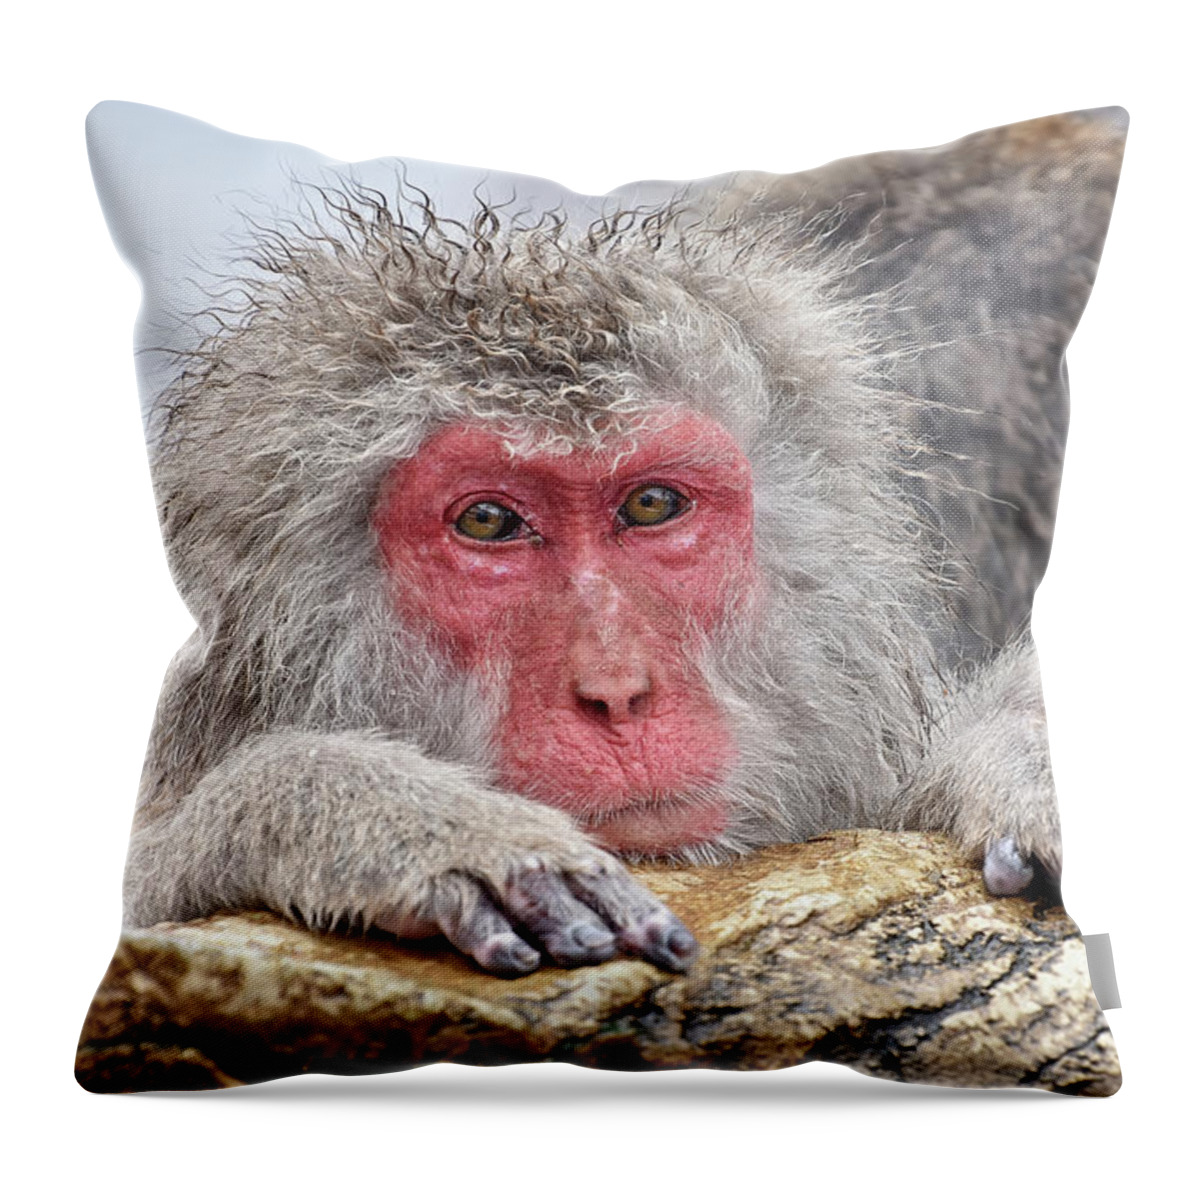 Japan Throw Pillow featuring the photograph Warming up by Kuni Photography